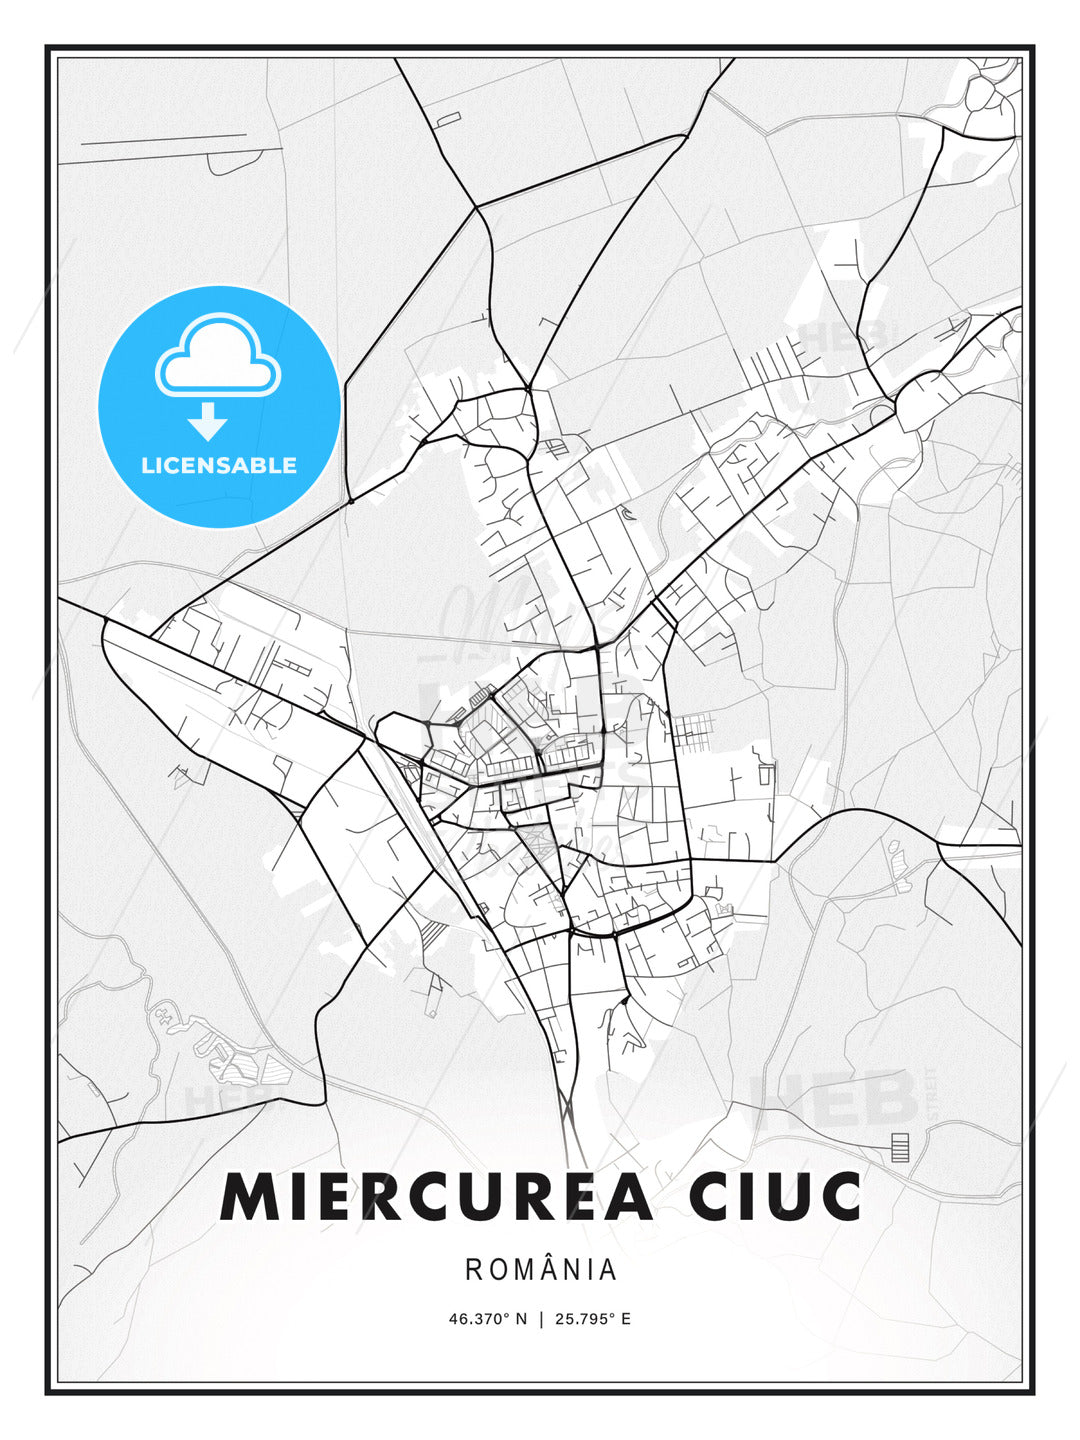 Miercurea Ciuc, Romania, Modern Print Template in Various Formats - HEBSTREITS Sketches